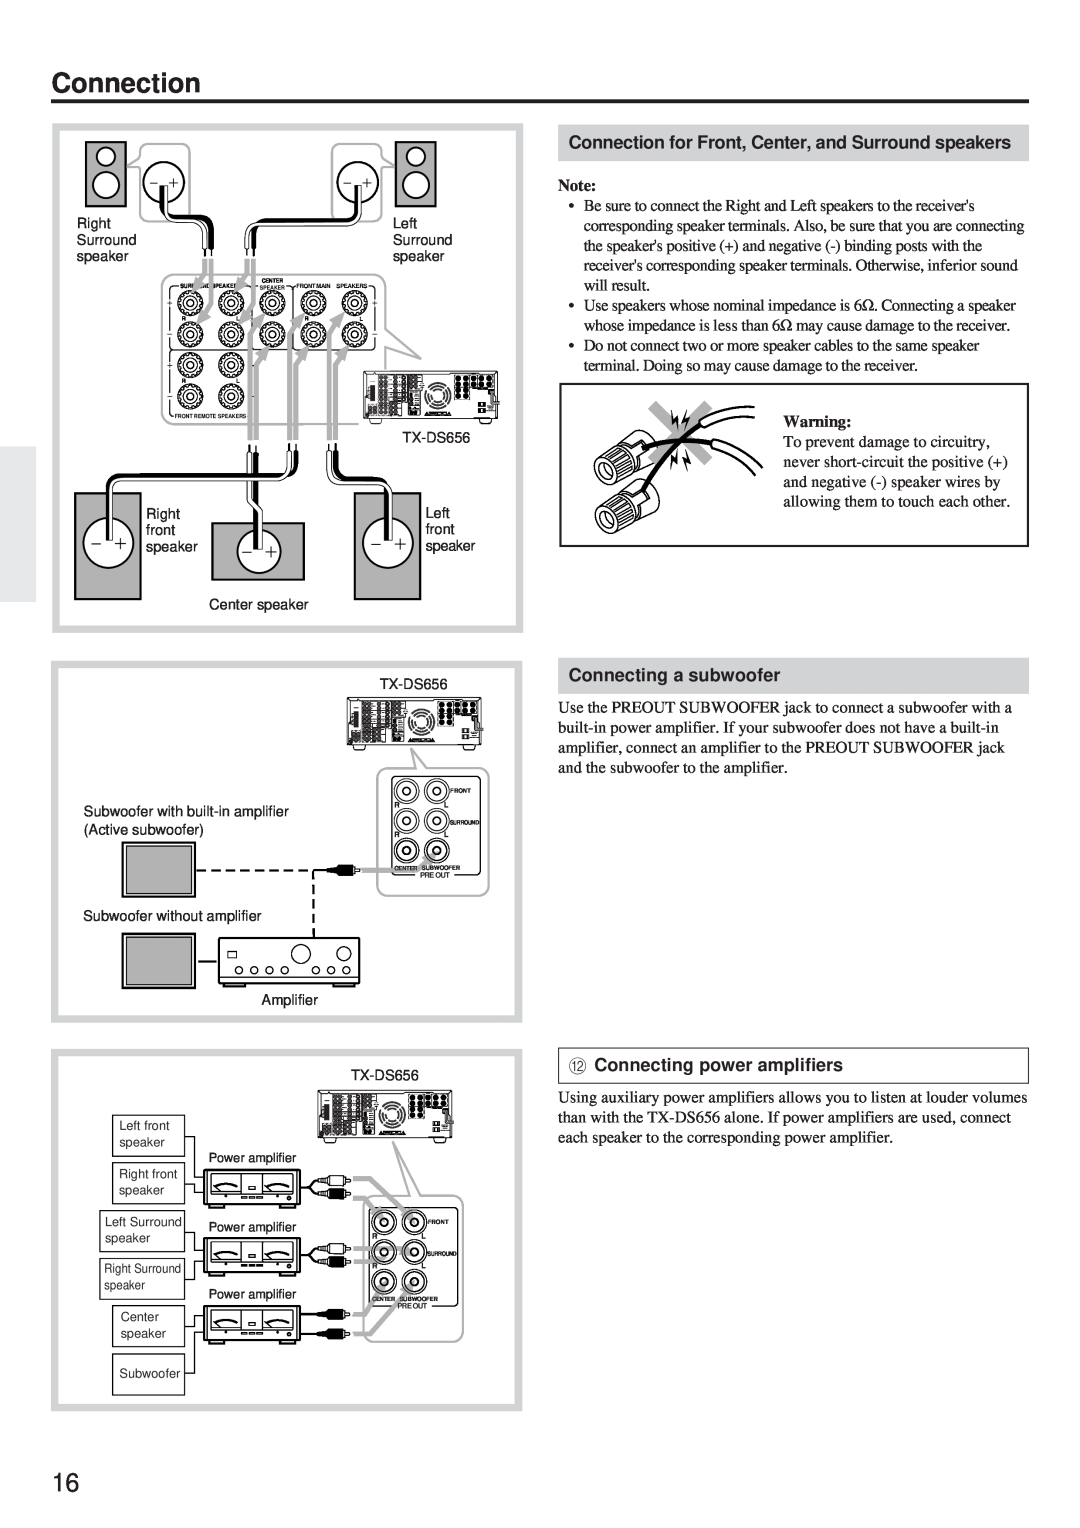 Onkyo TX-DS656 instruction manual Connection, Connecting a subwoofer, B Connecting power amplifiers 